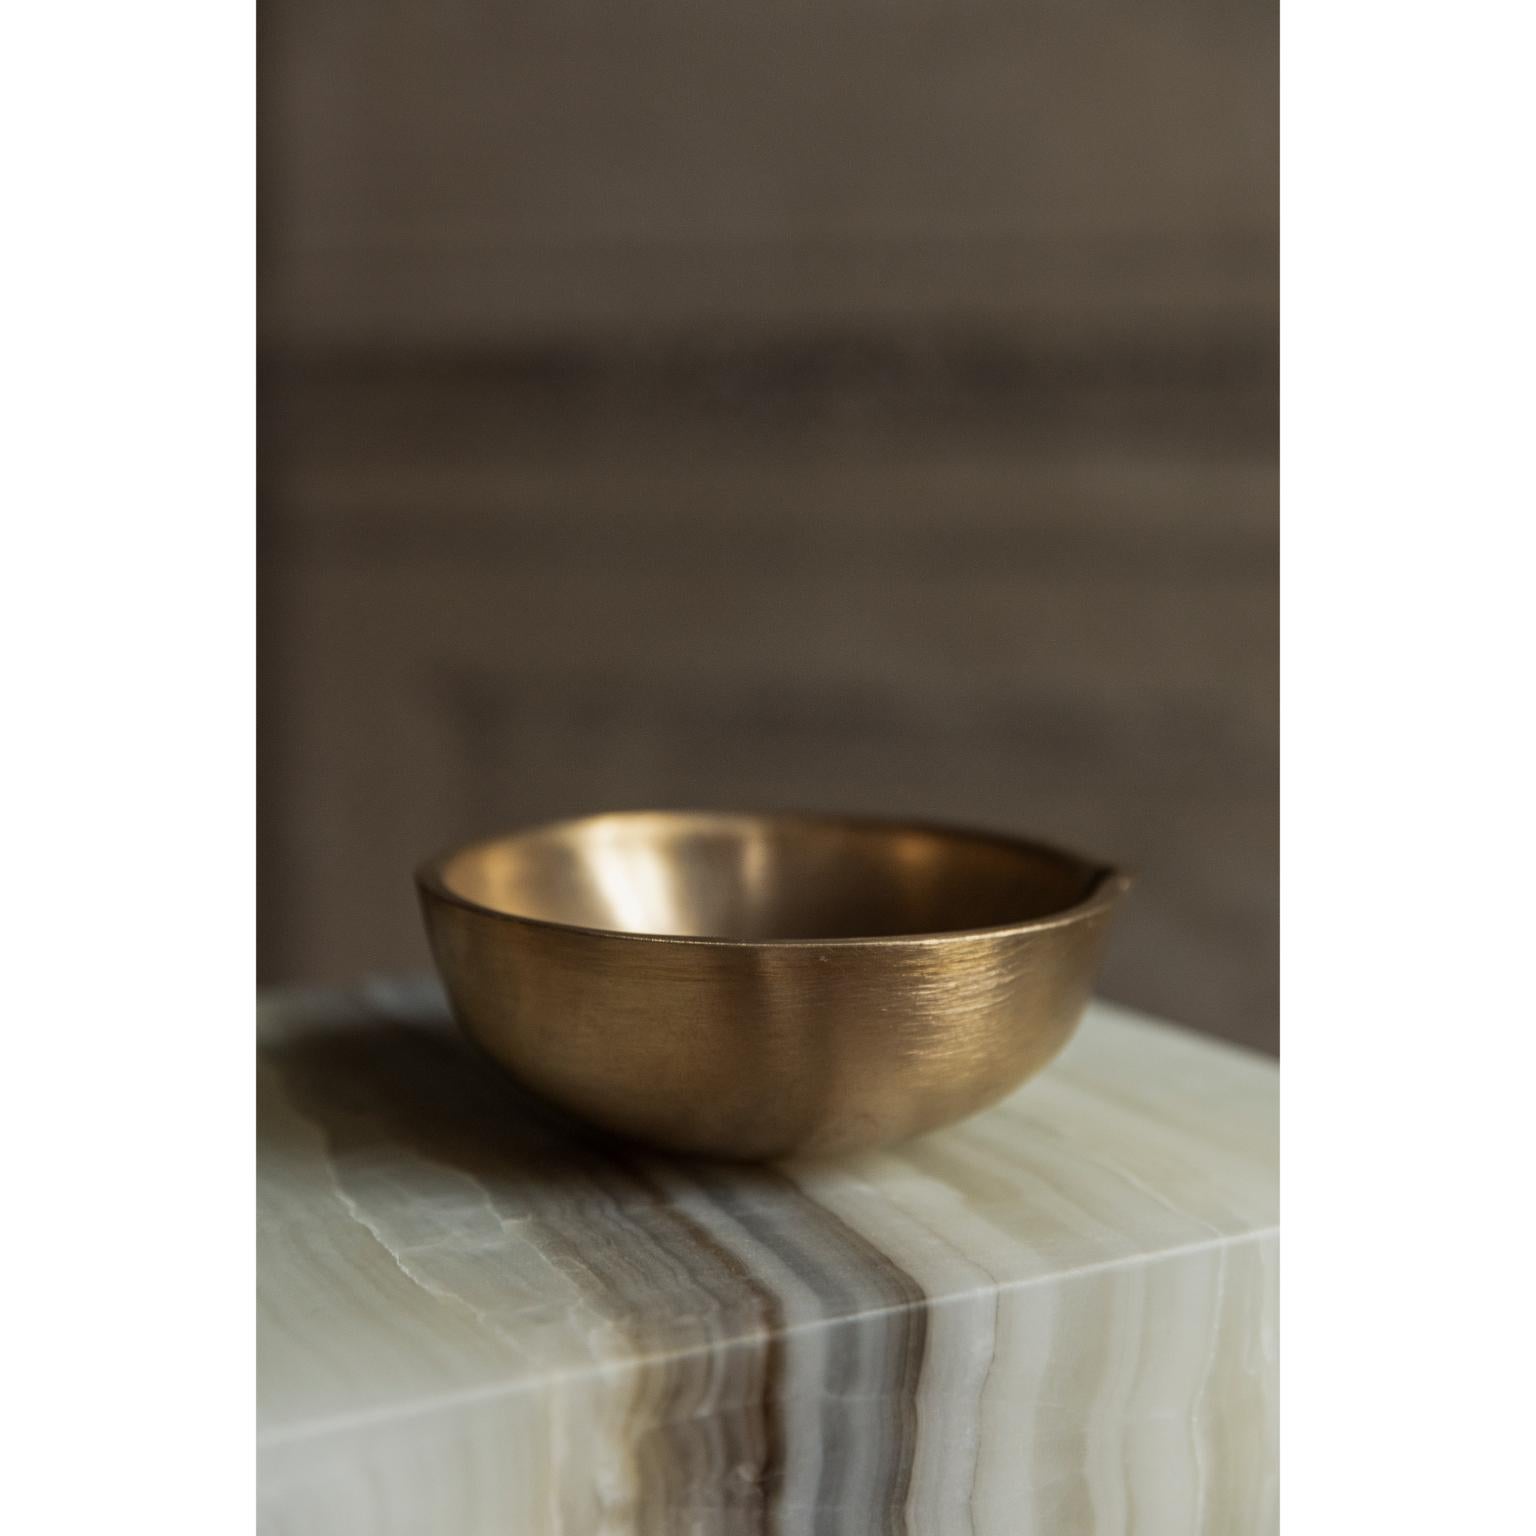 Golden bronze bowl by Rick Owens
2007
Dimensions: L 14 x W 14 x H 8 cm
Materials: Bronze
Weight: 1.5 kg
The gold edition is an exclusivity of Galerie Philia

Rick Owens is a California-born fashion and furniture has developed a unique style